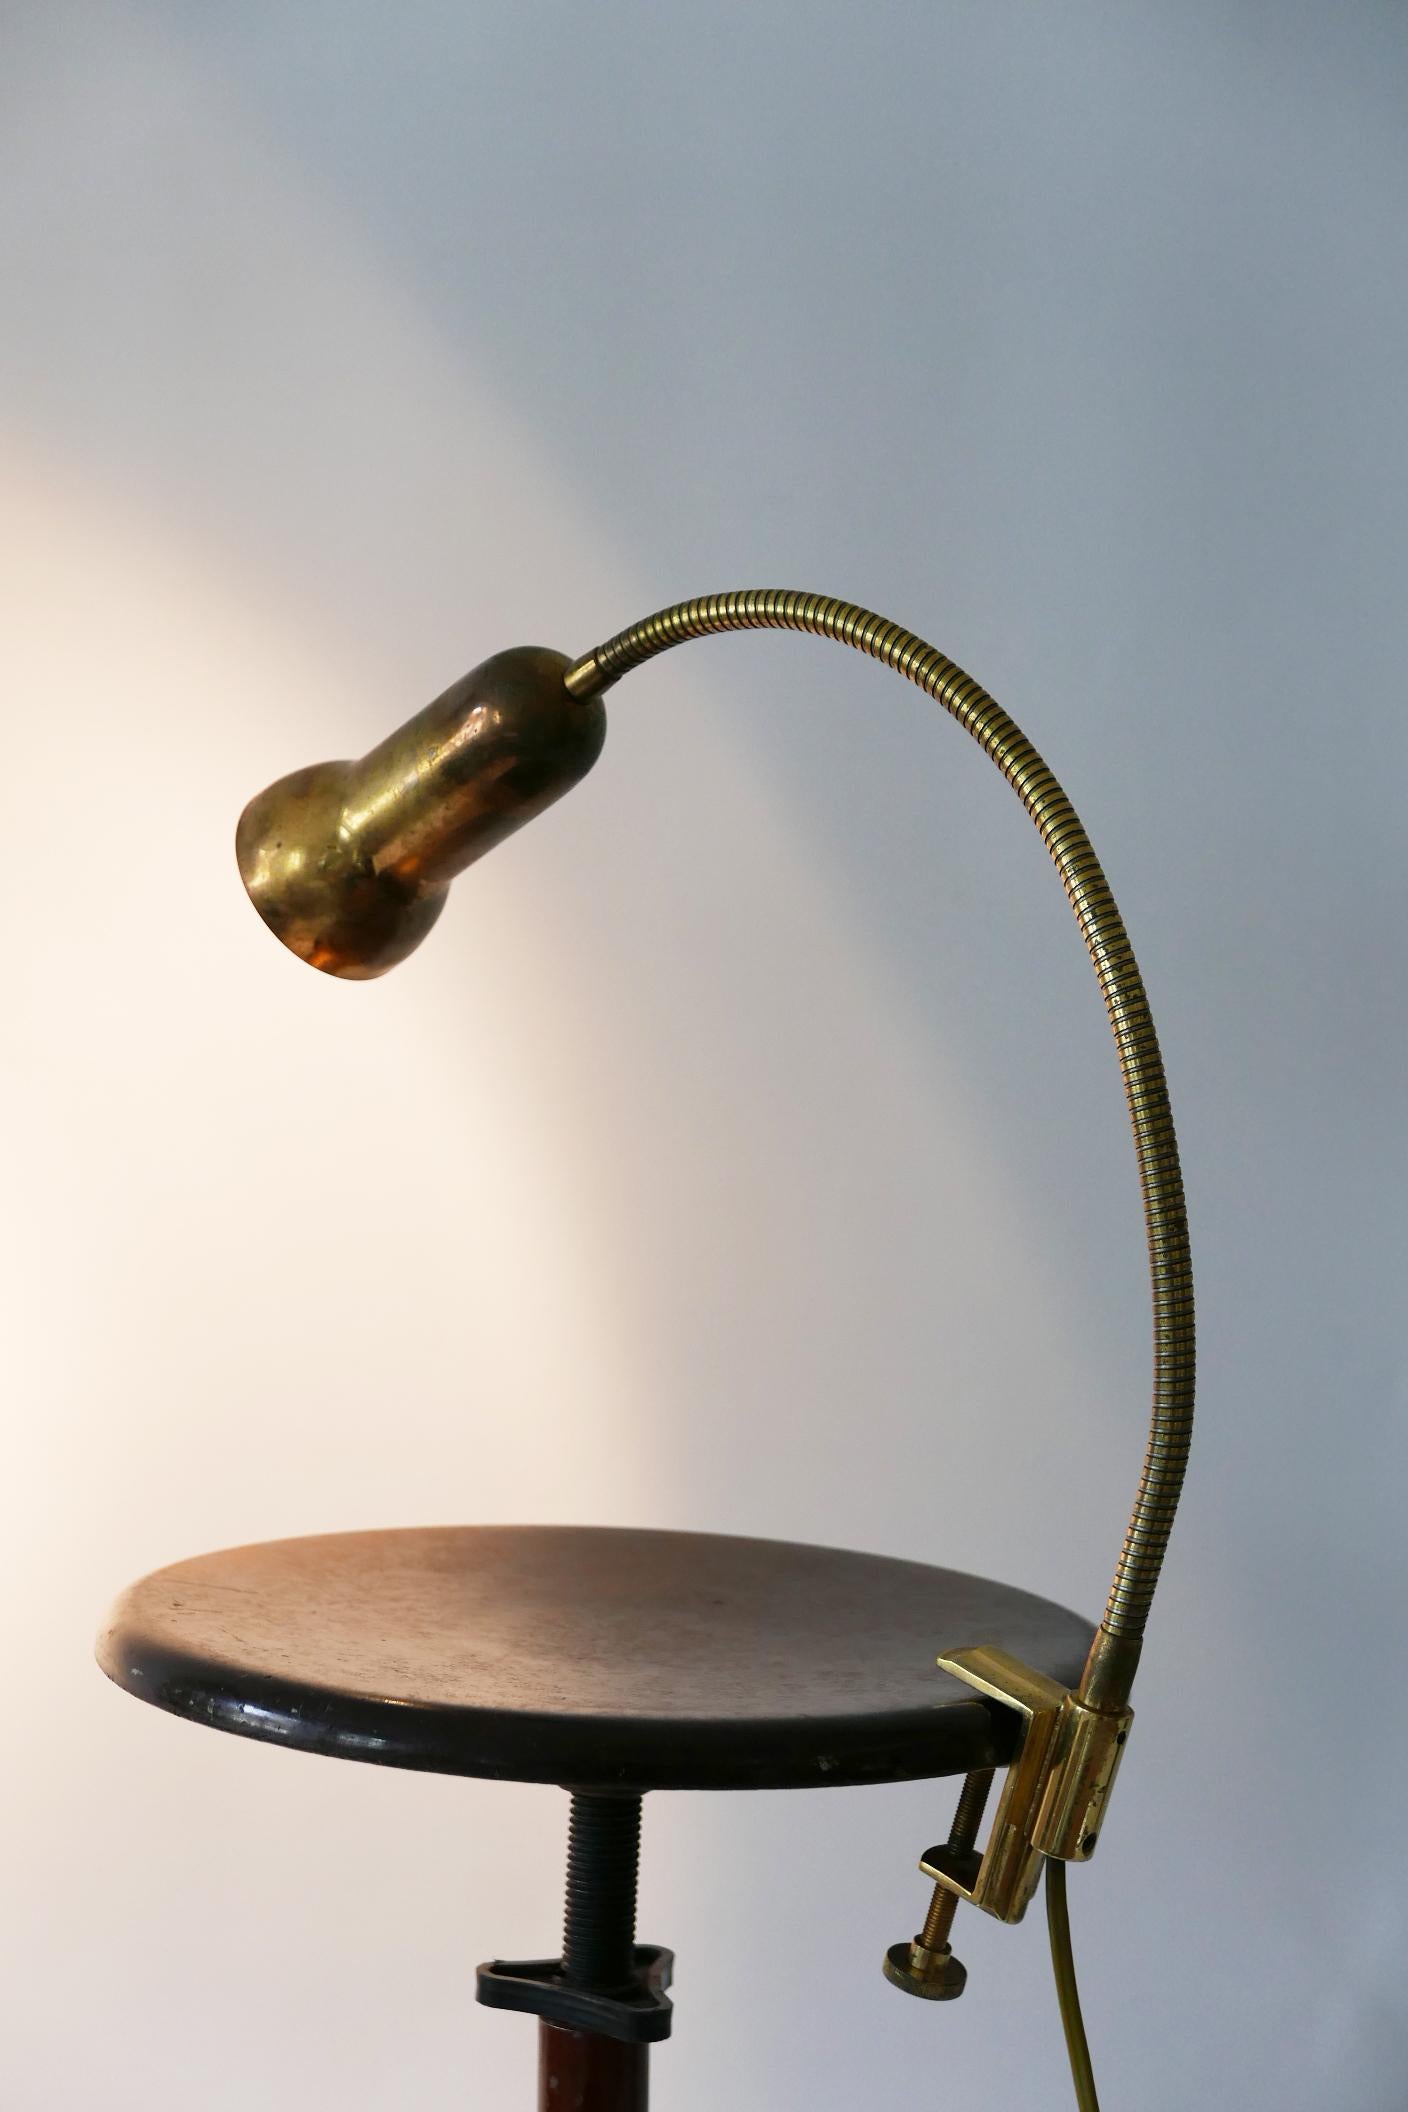 Late 20th Century Mid-Century Modern Brass Clamp Table Lamp by Gebrüder Cosack, 1970s, Germany